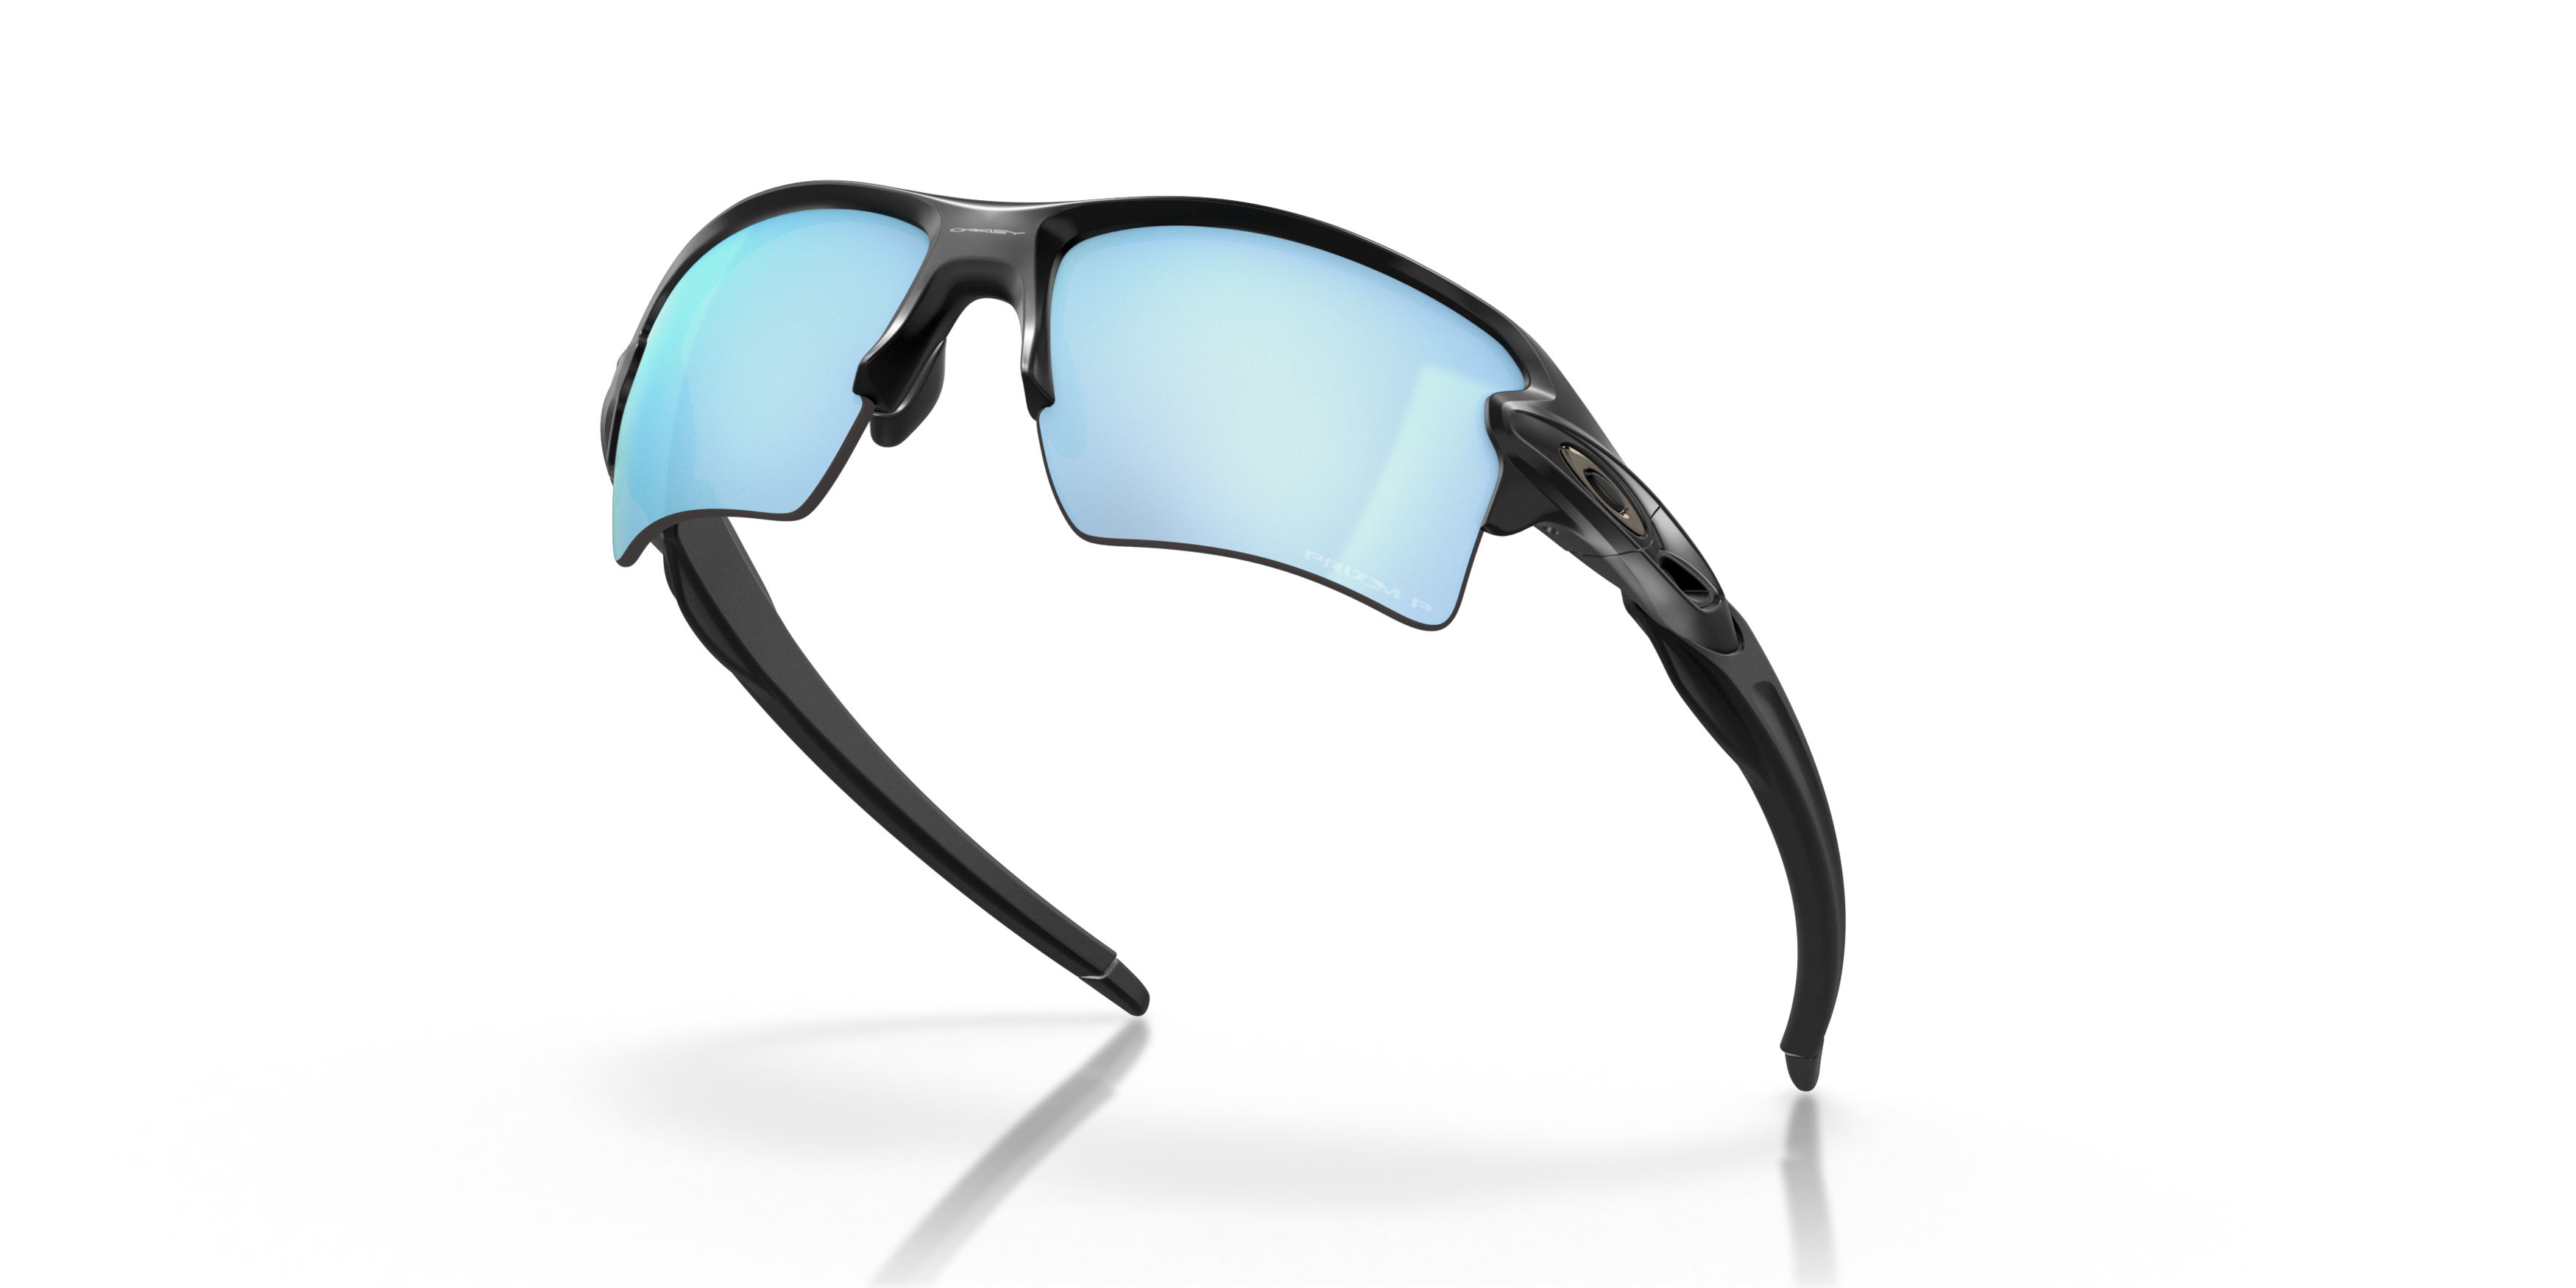 [products.image.bottom_up] Oakley Flak 2.0 XL OO 9188 Sunglasses